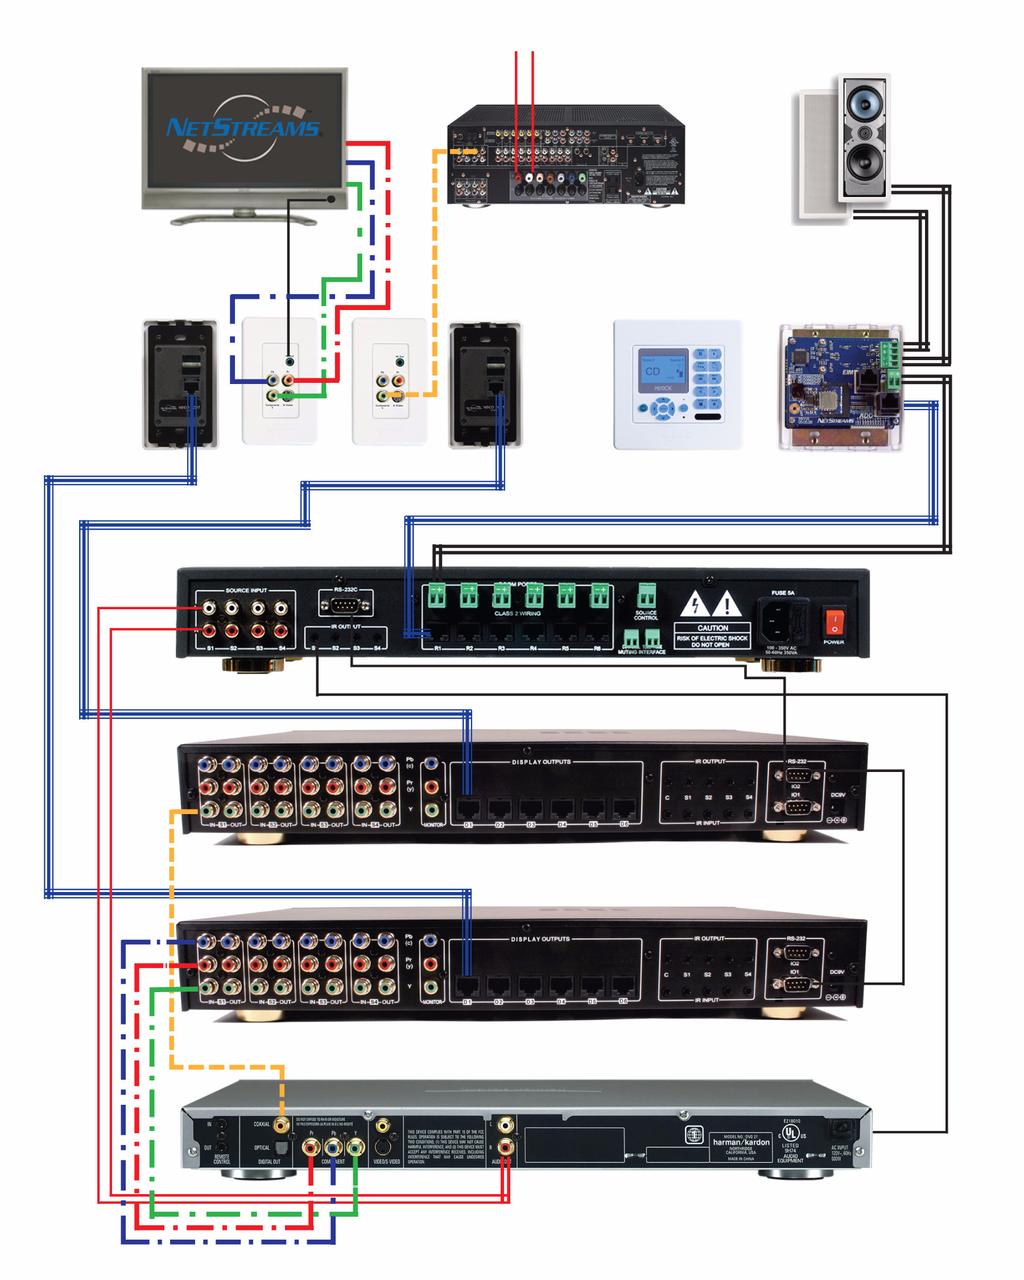 NetStreams Panorama System Installation Guide installation with a Musica MU5066KP. For more detail on the ports on the rear panel of the Panorama, see PAN6400 VDC on page 2-3.